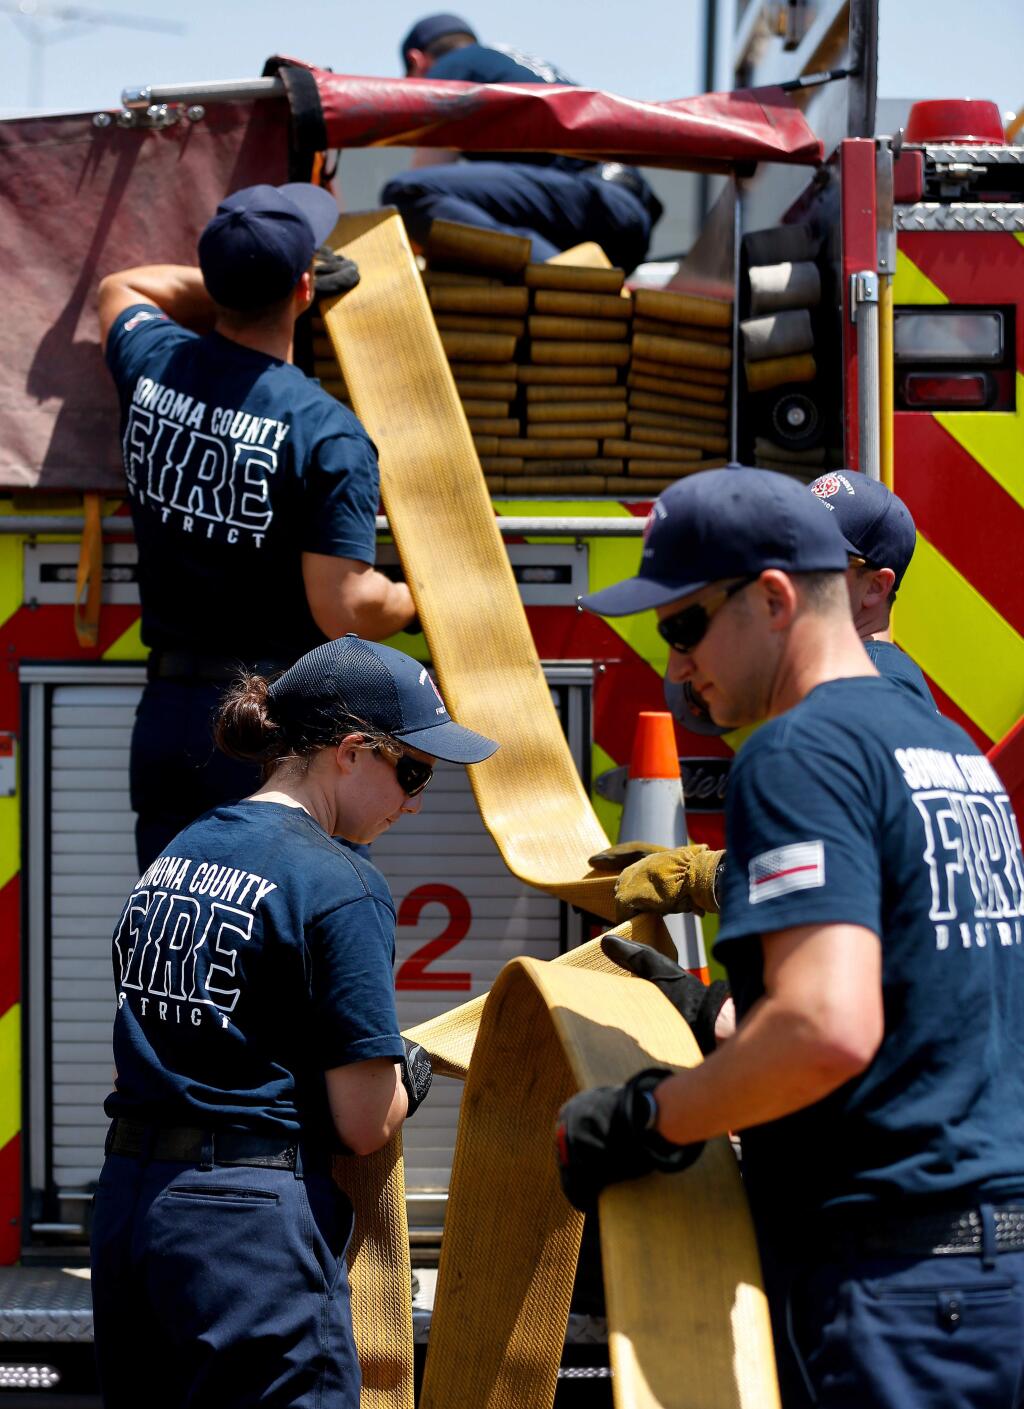 Recruit firefighters of Class 19-1 reload supply hose onto a fire engine between training evolutions during the Sonoma County Fire District Firefighter Recruit Academy at Santa Rosa Junior College Public Safety Center in Santa Rosa, California, on Wednesday, May 29, 2019. (Alvin Jornada / The Press Democrat)